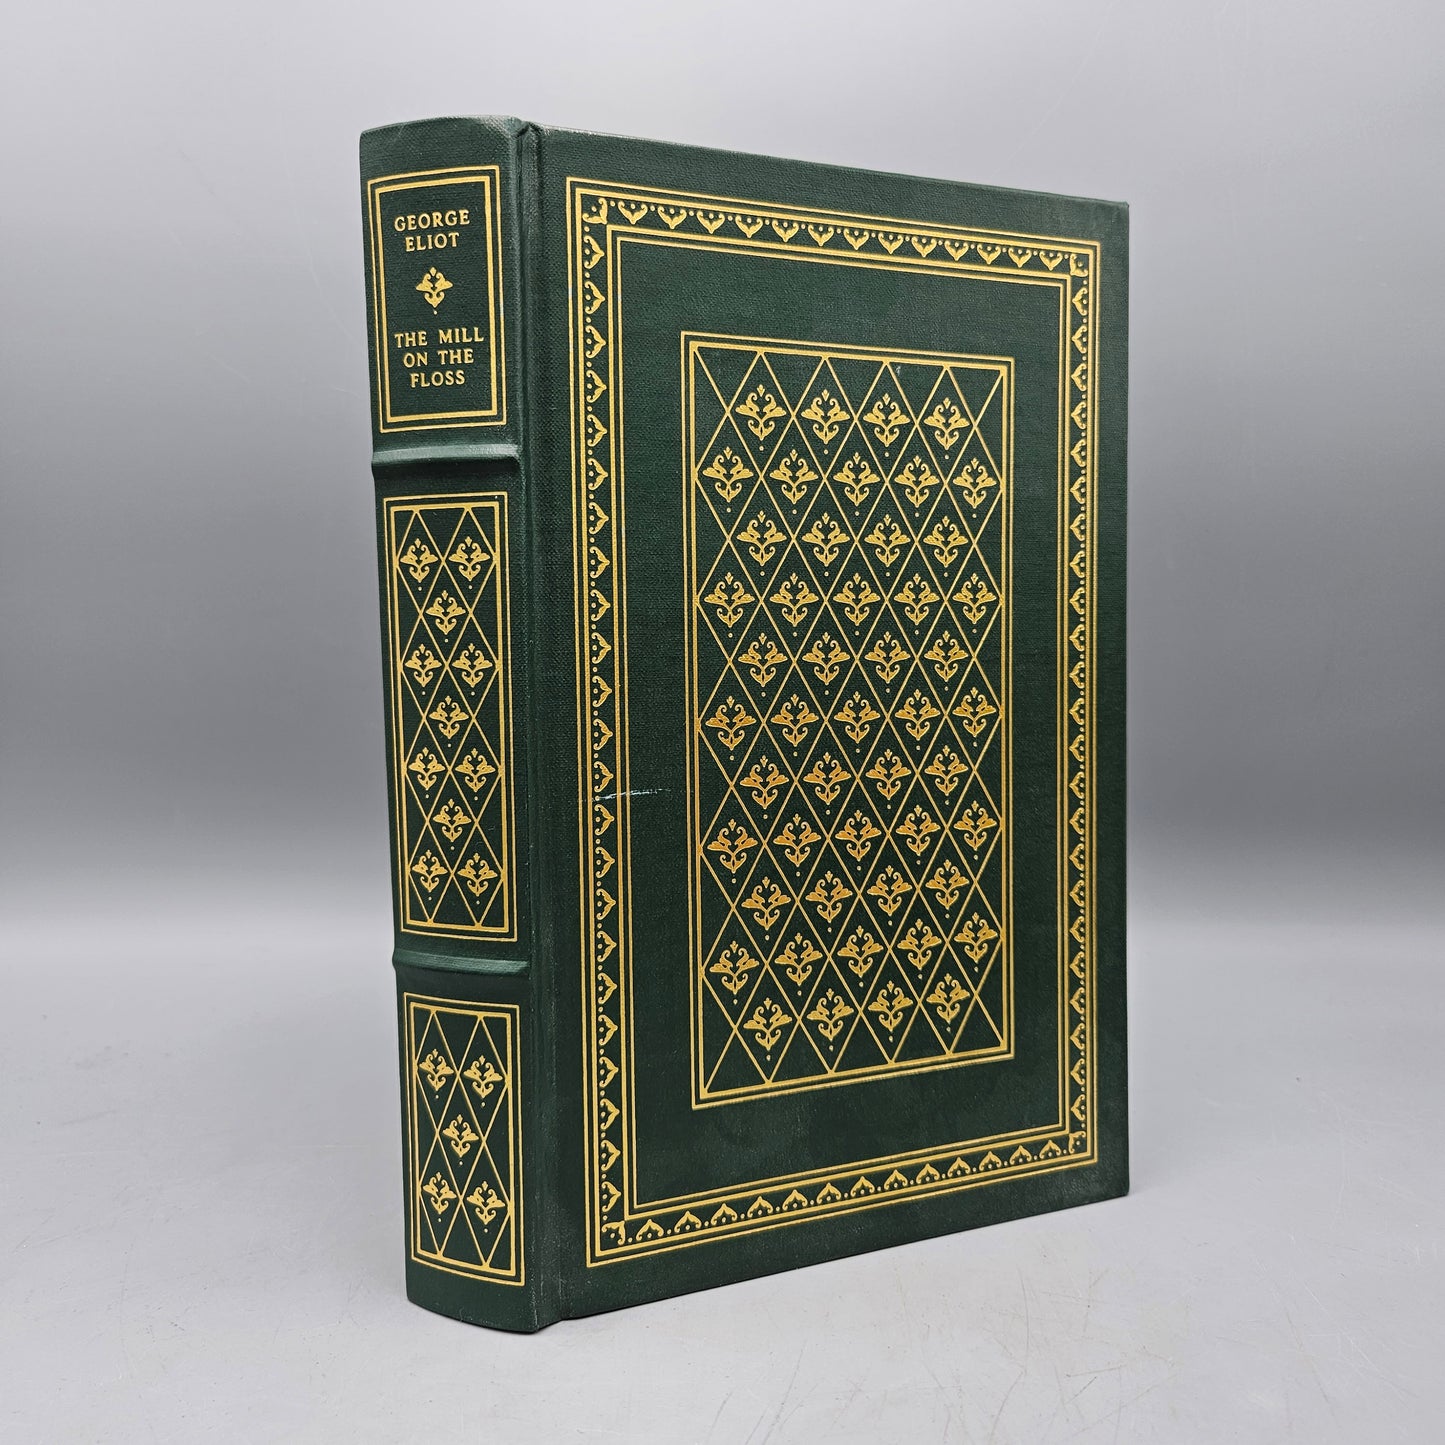 Leatherbound Book - George Eilot "The Mill on the Floss" Franklin Library